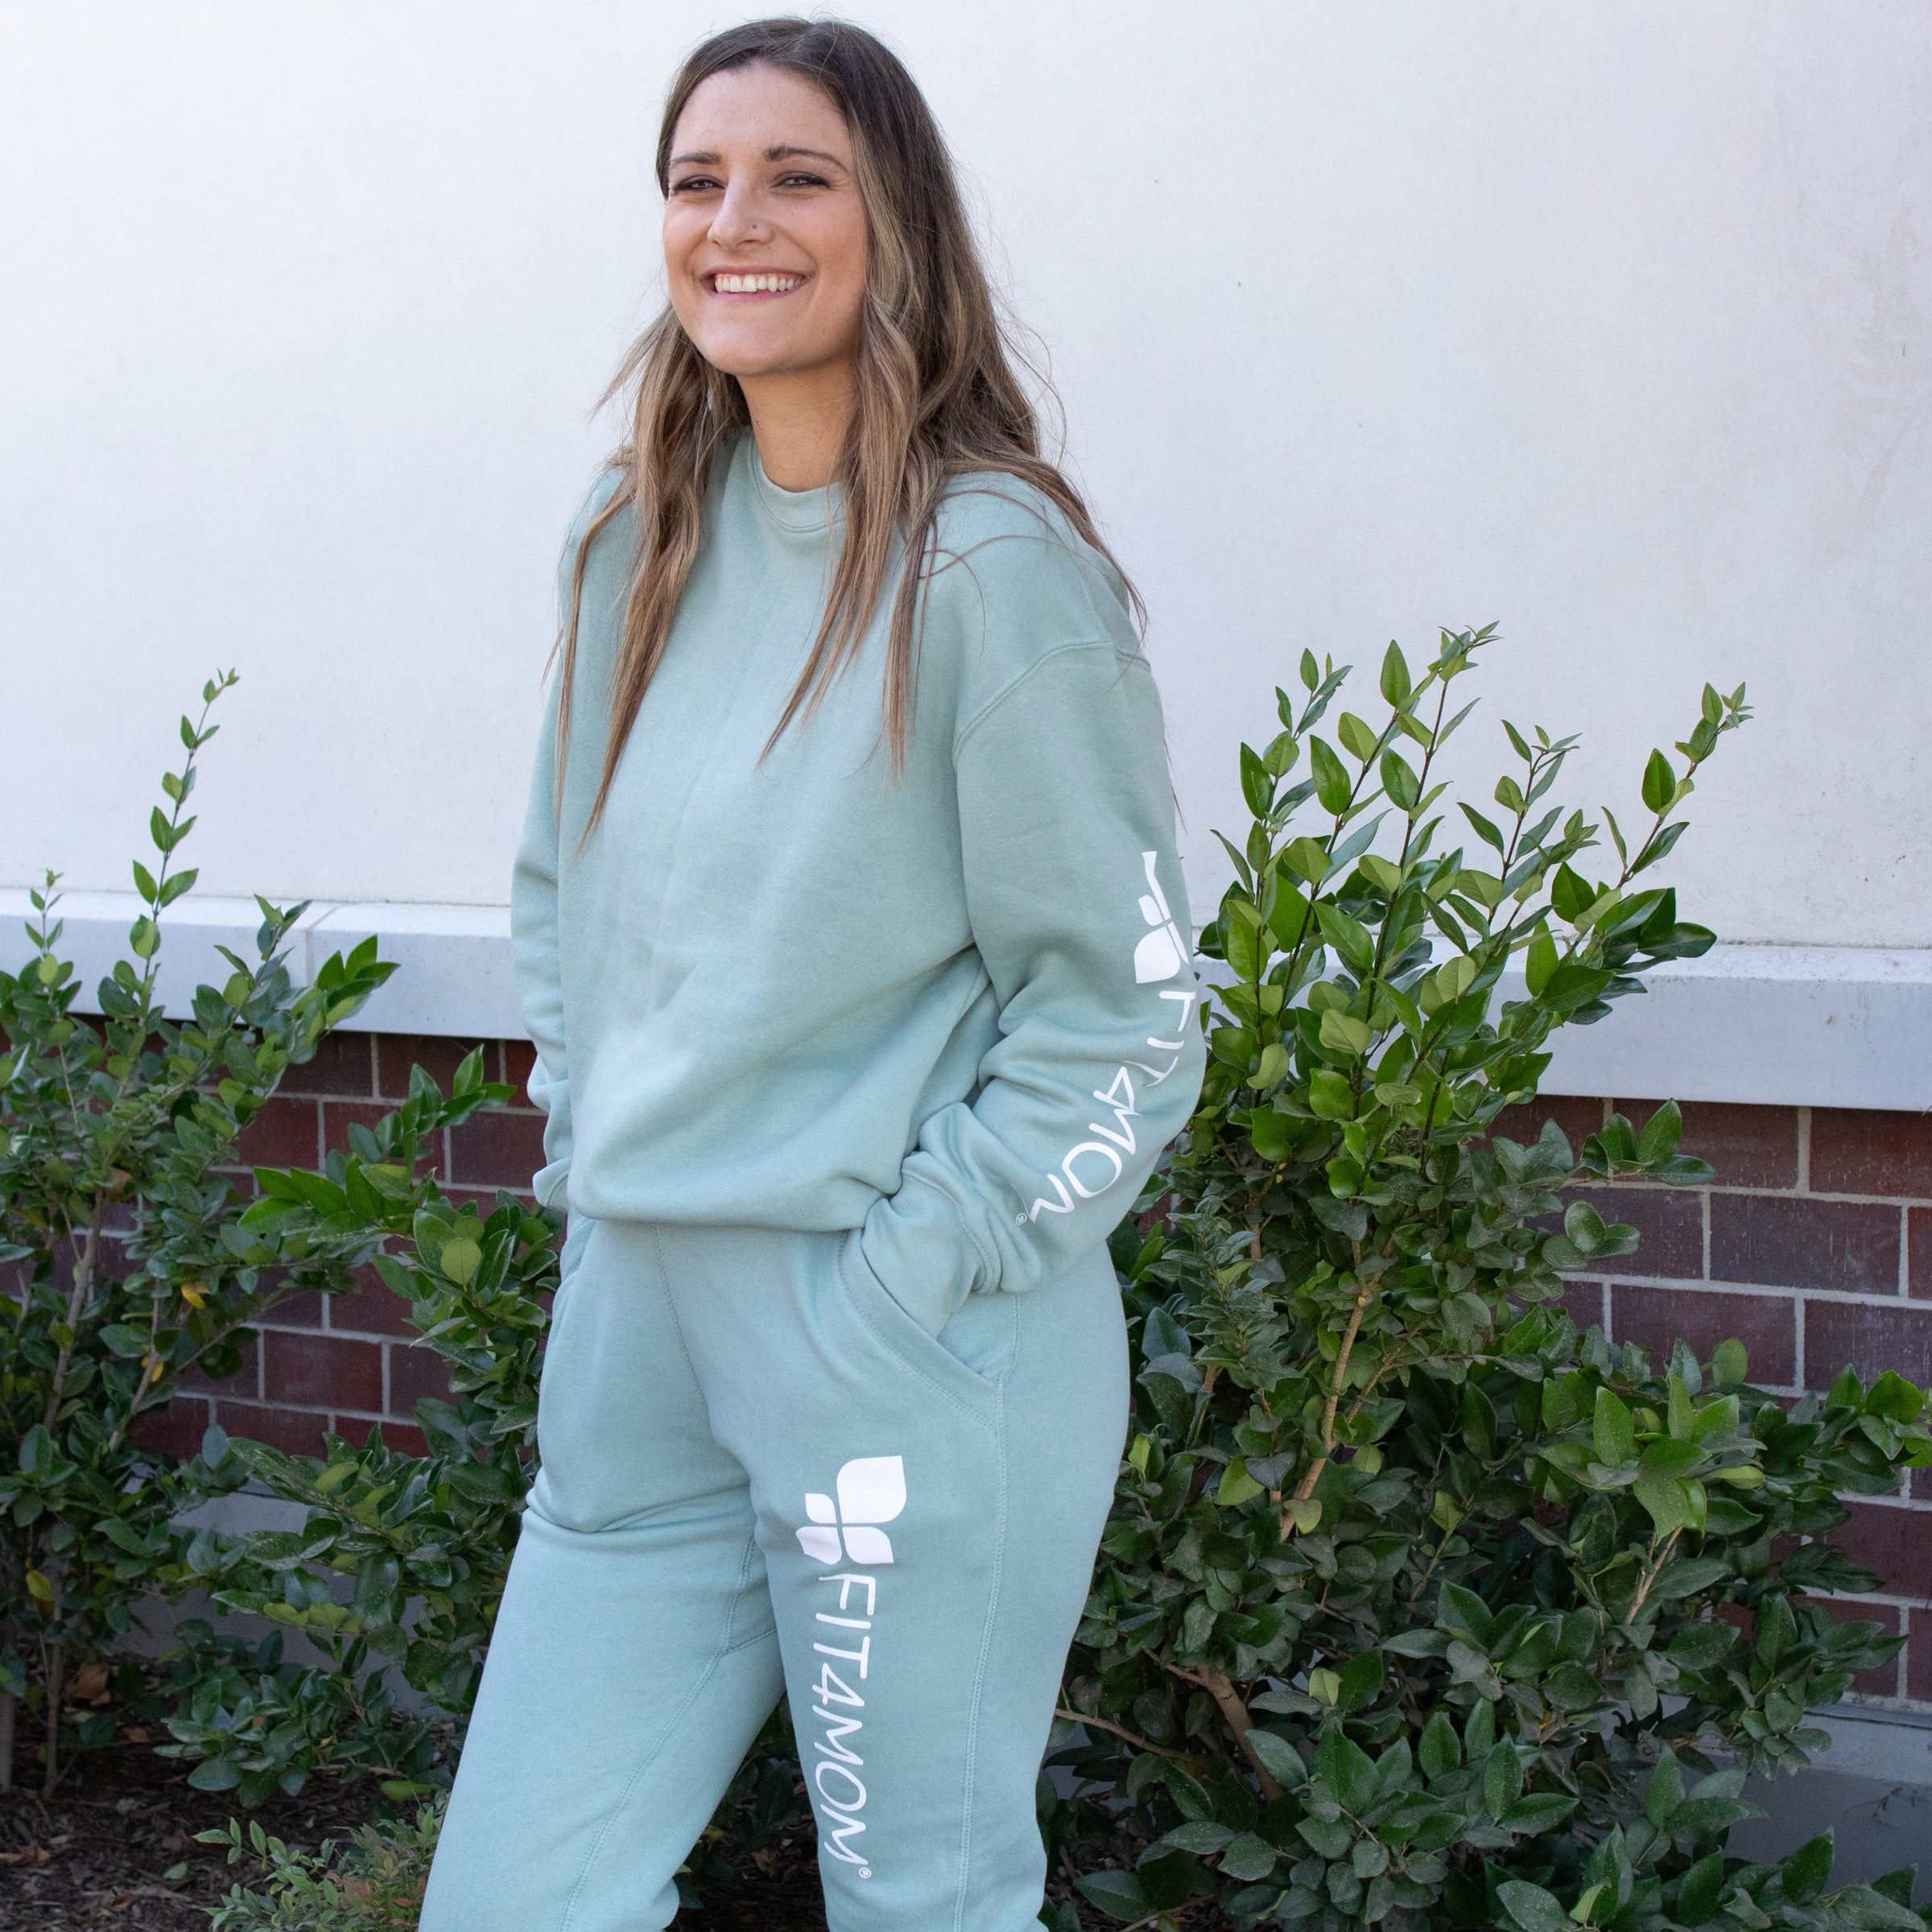 Women's Jogger from Crew Clothing Company